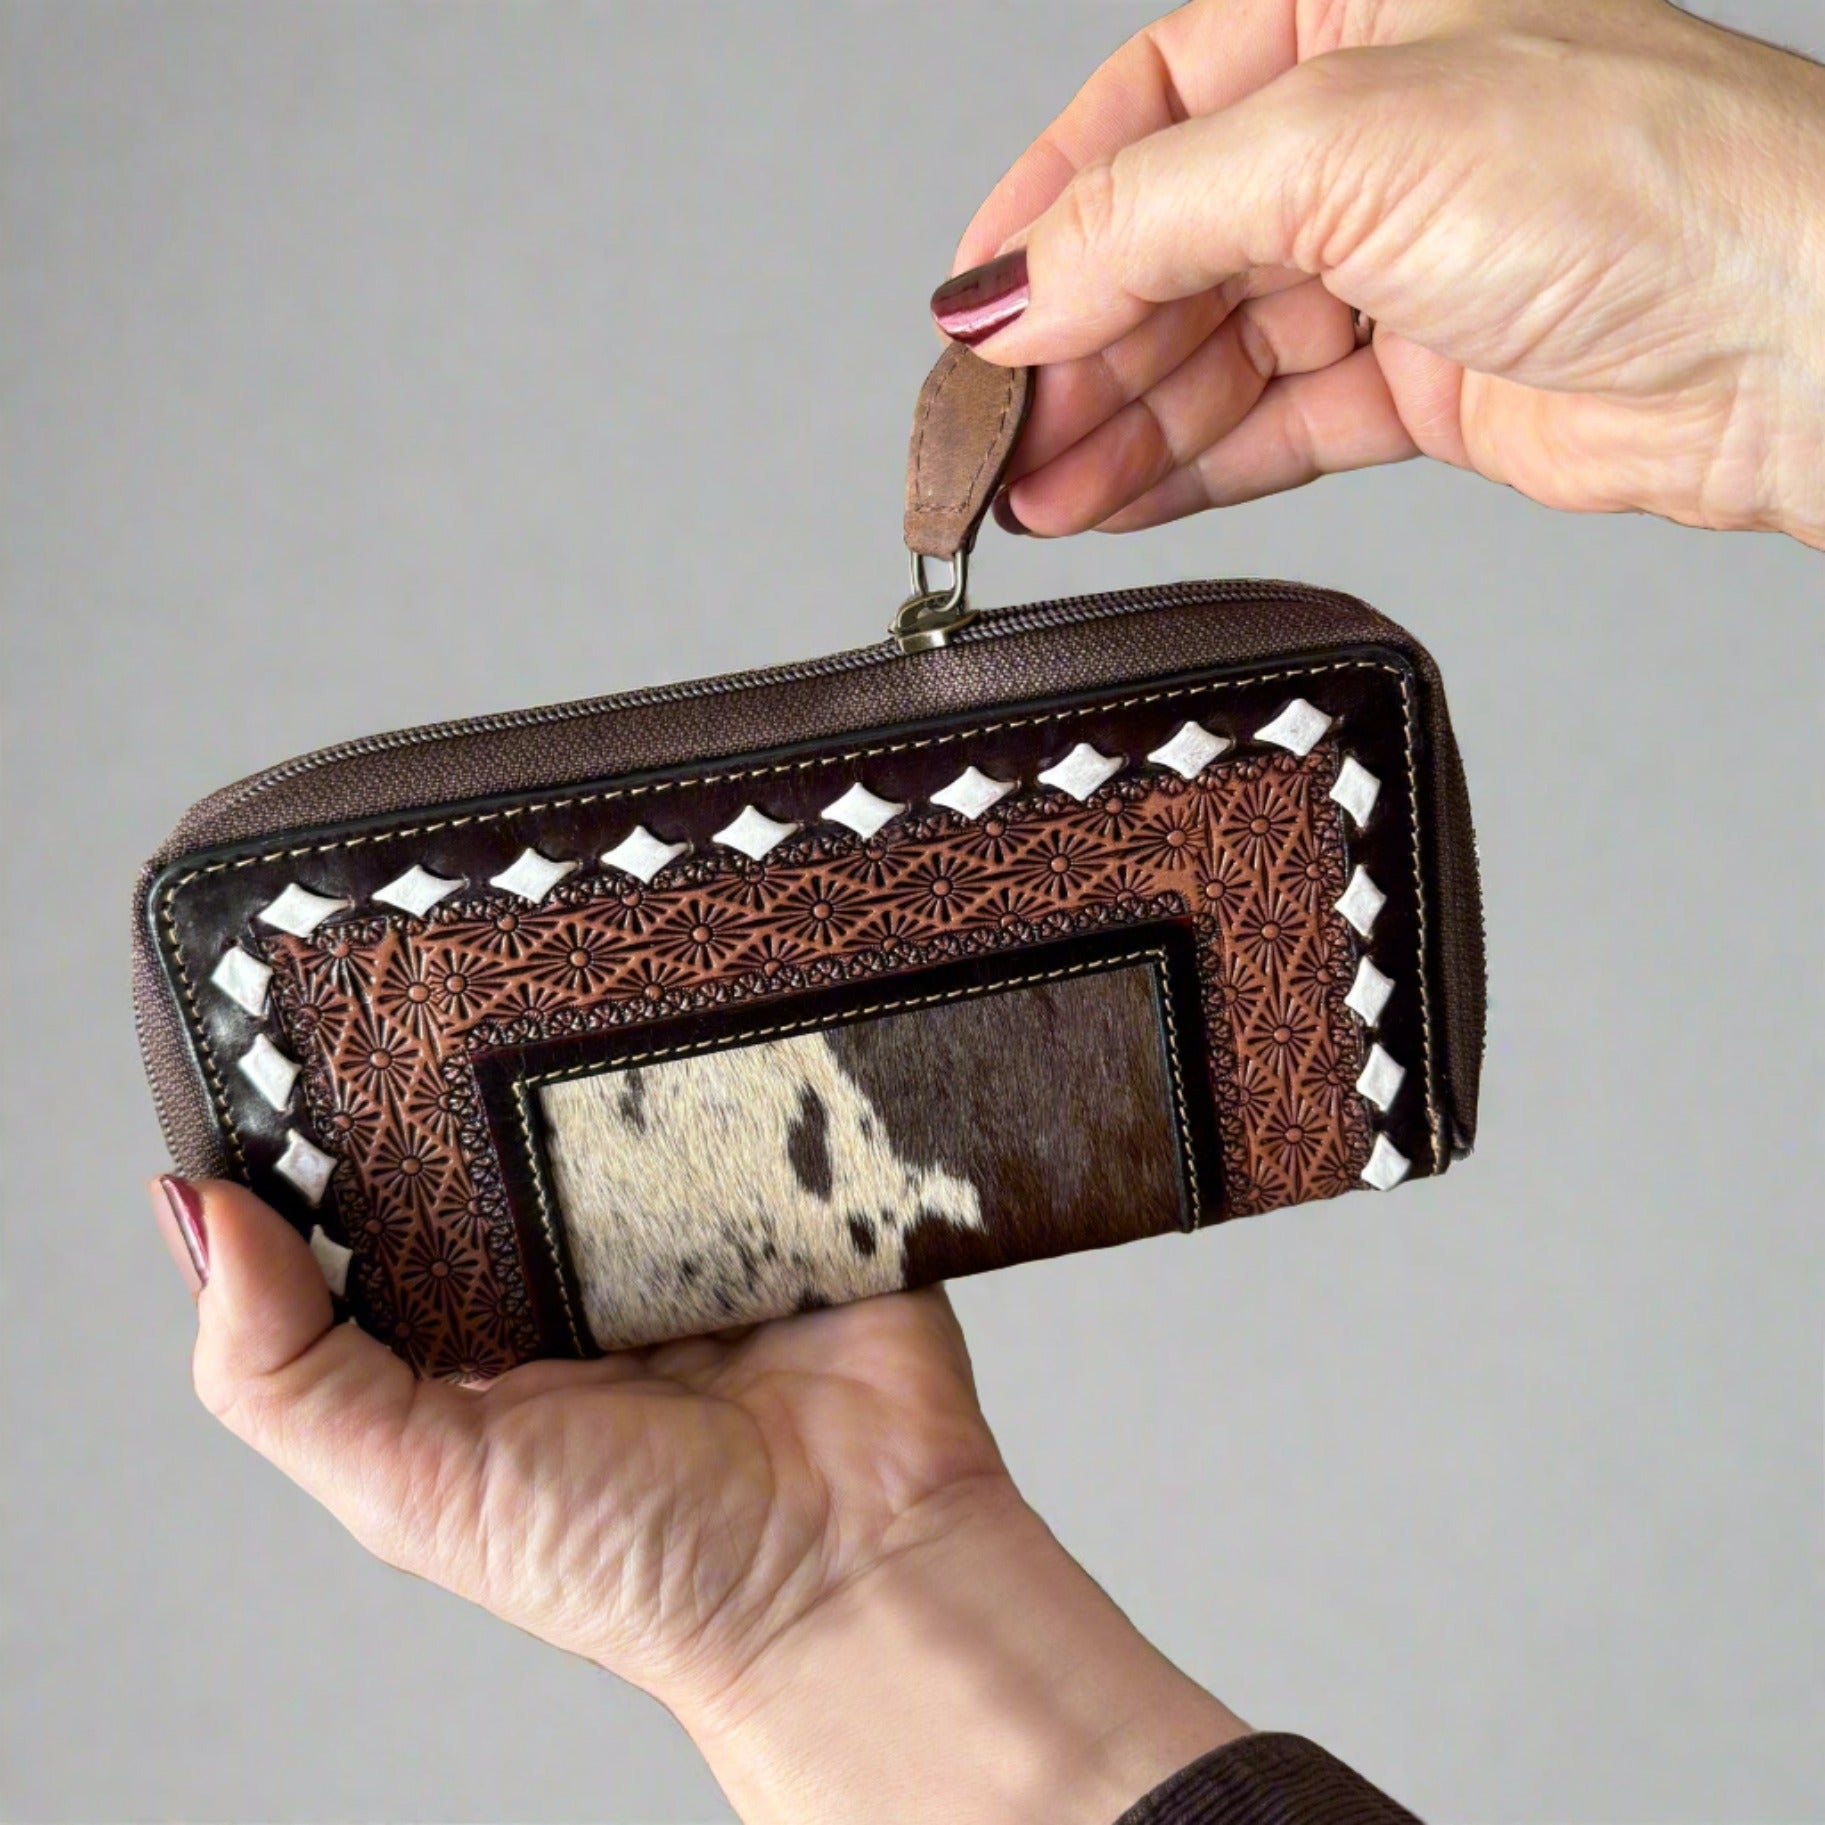 Boho Chic Cowhide Leather Zip Wallet Clutch